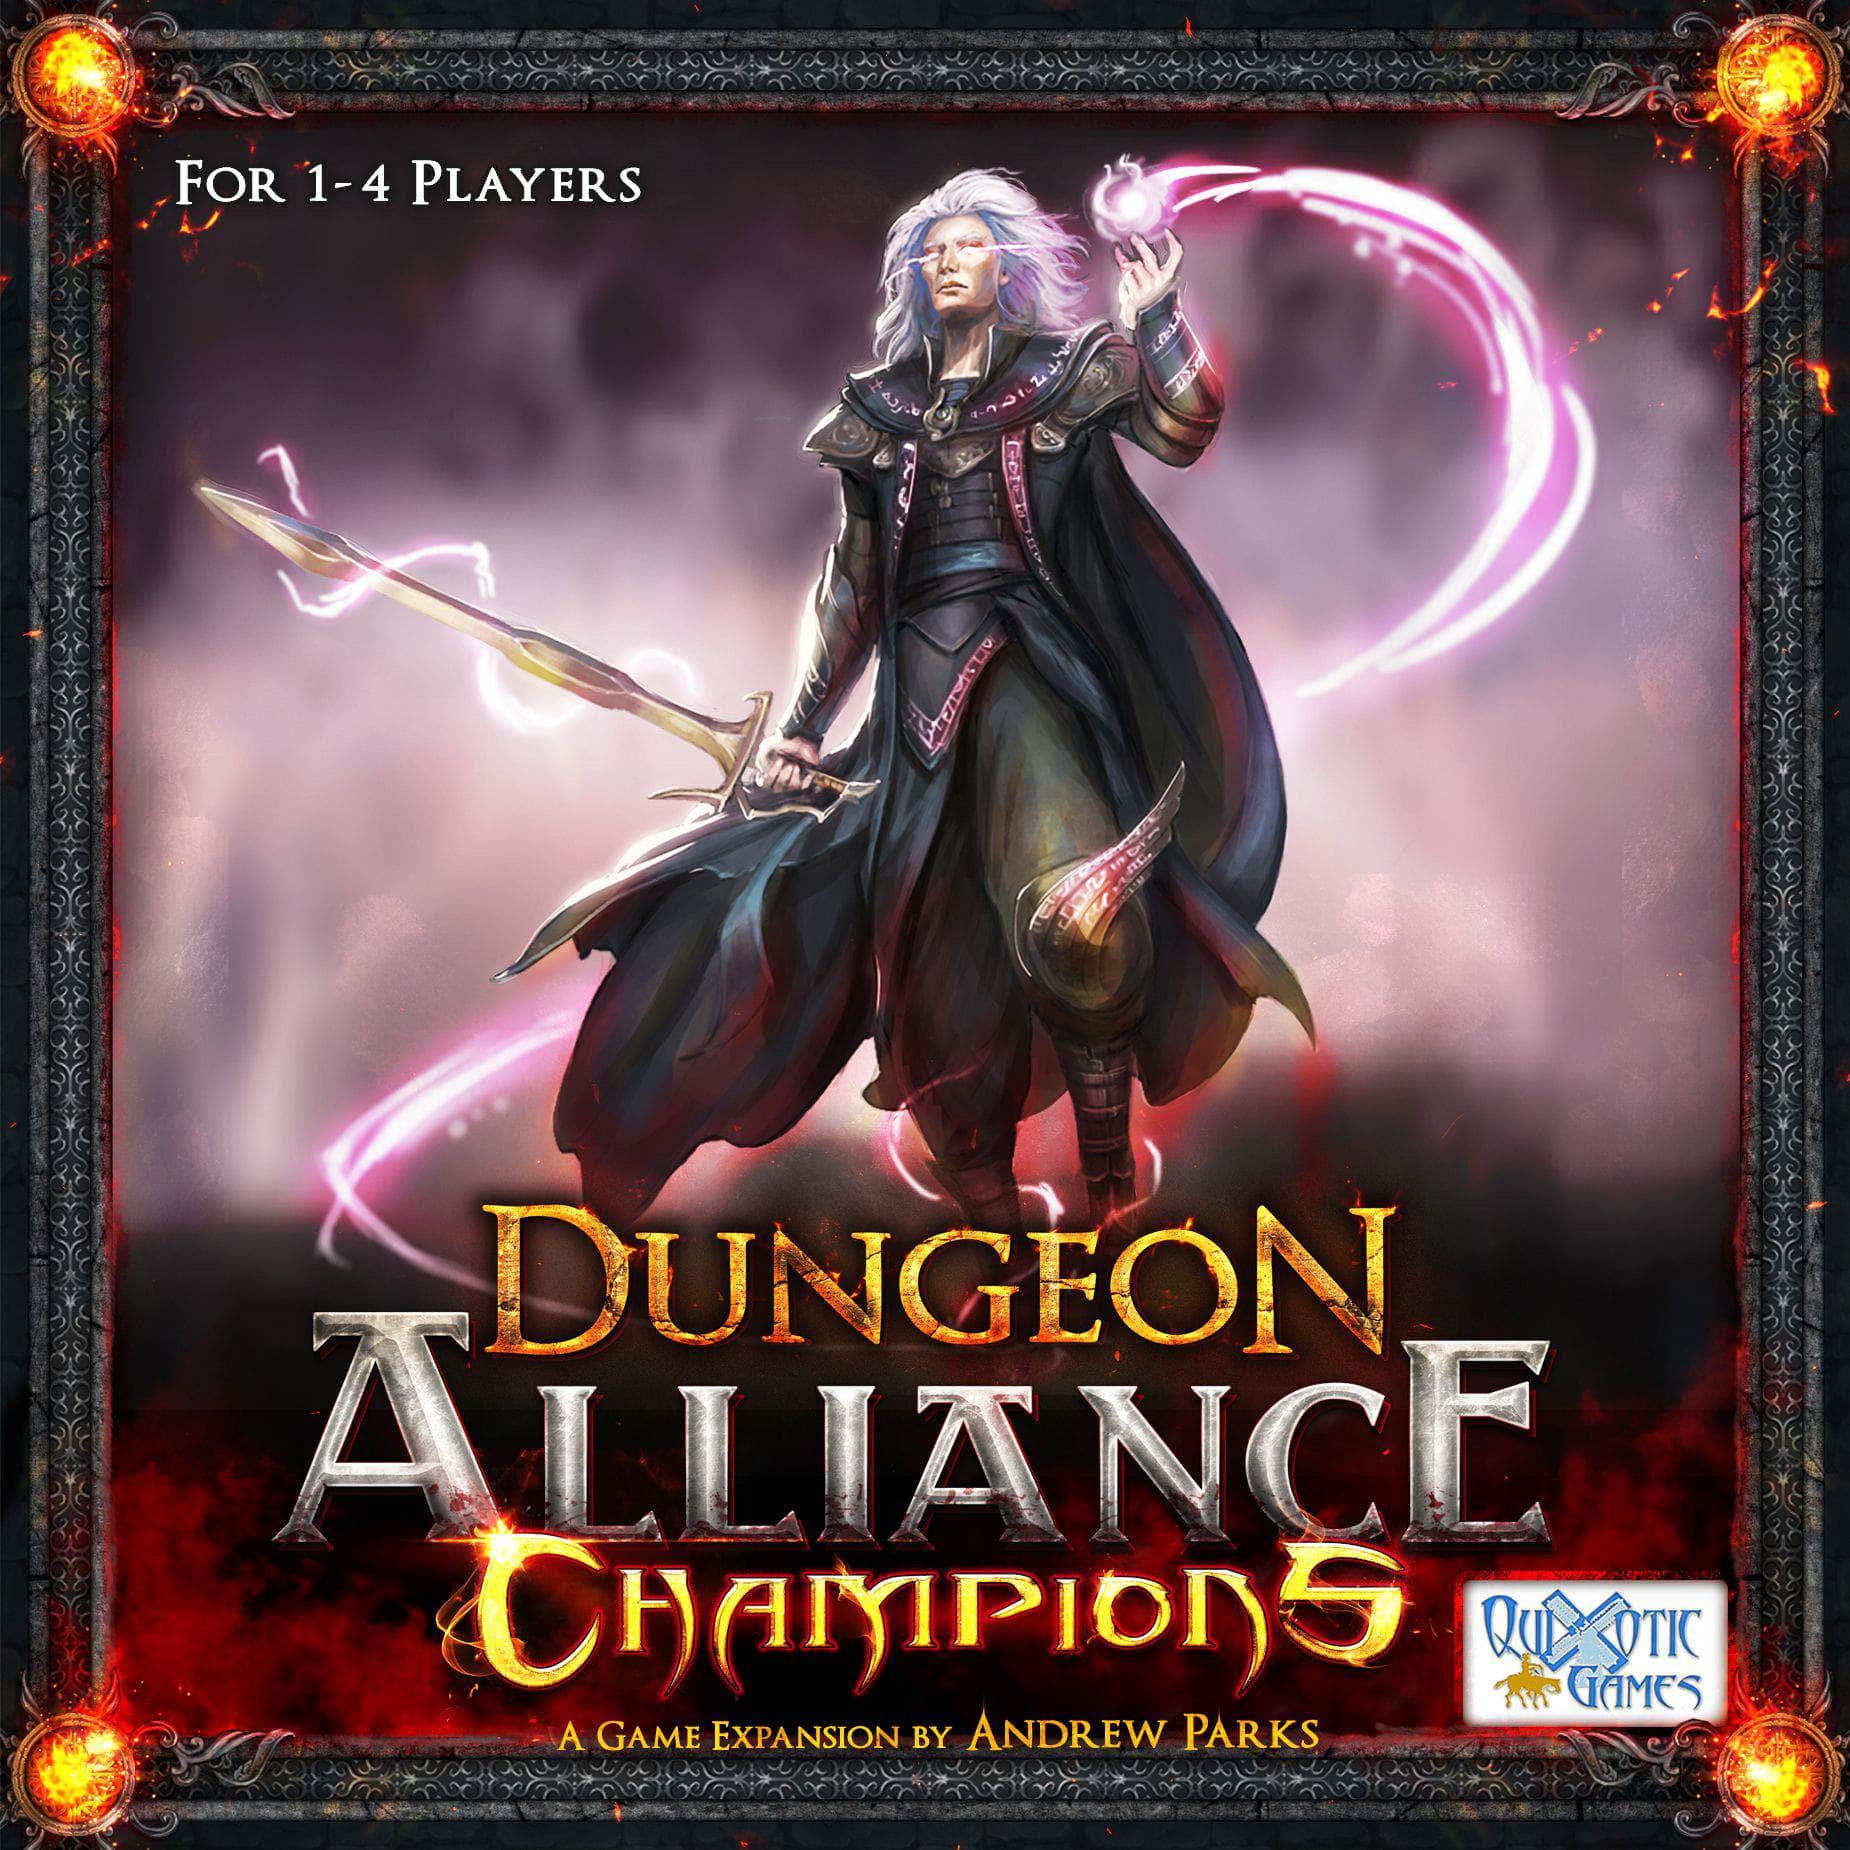 Dungeon Alliance: Champions Expansion (Retail Edition) Retail Board Game Expansion Quixotic Games 0850769005026 KS800681A